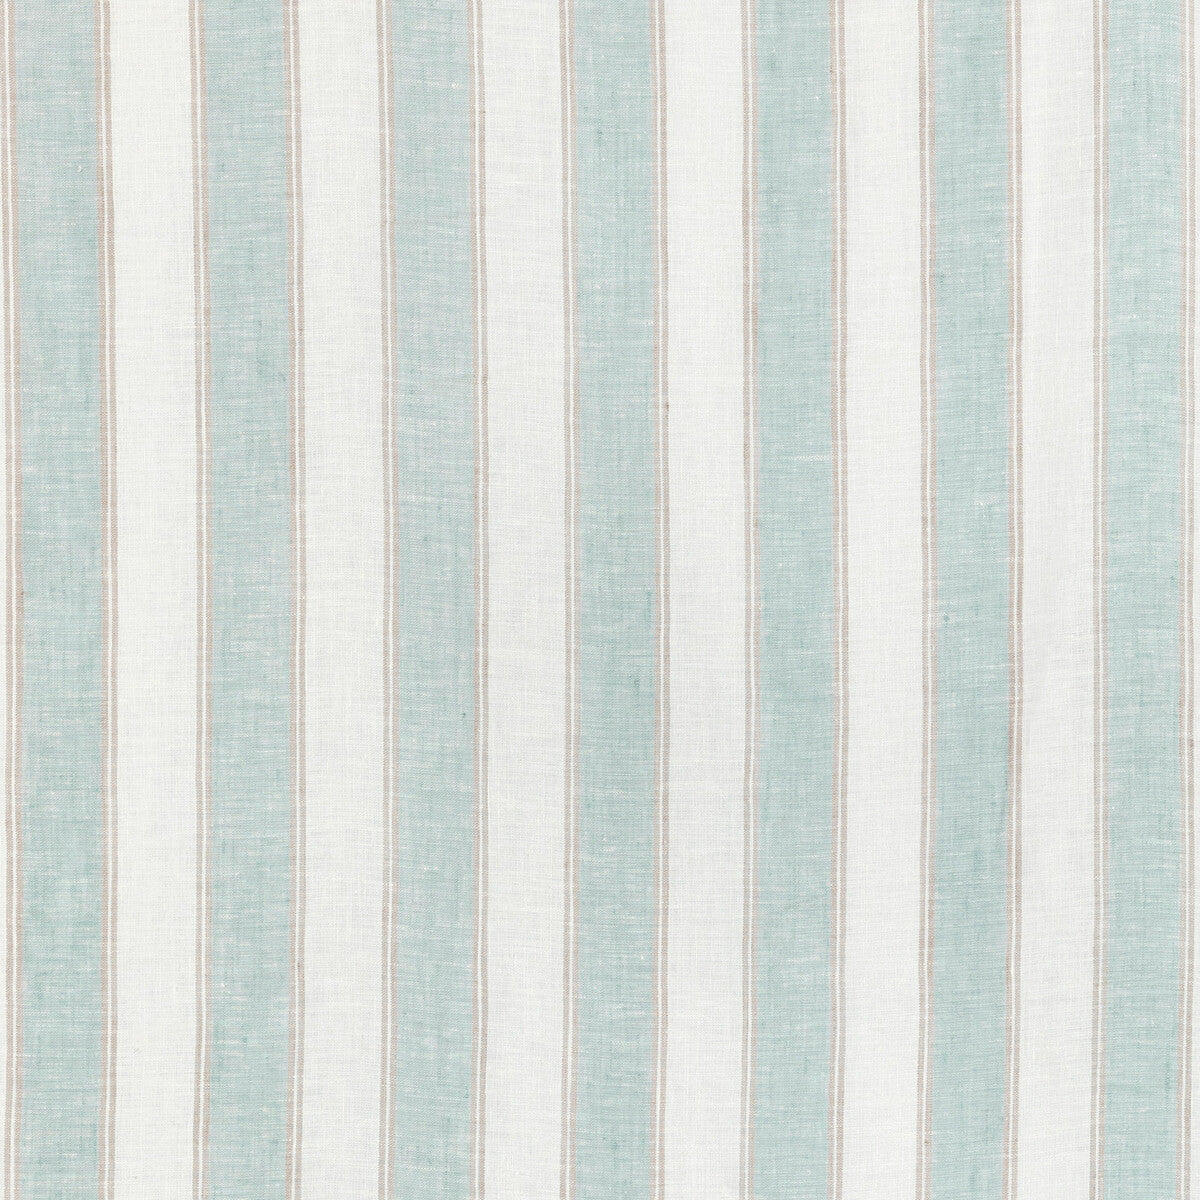 Humphrey Sheer fabric in lagoon color - pattern 2021118.13.0 - by Lee Jofa in the Summerland collection